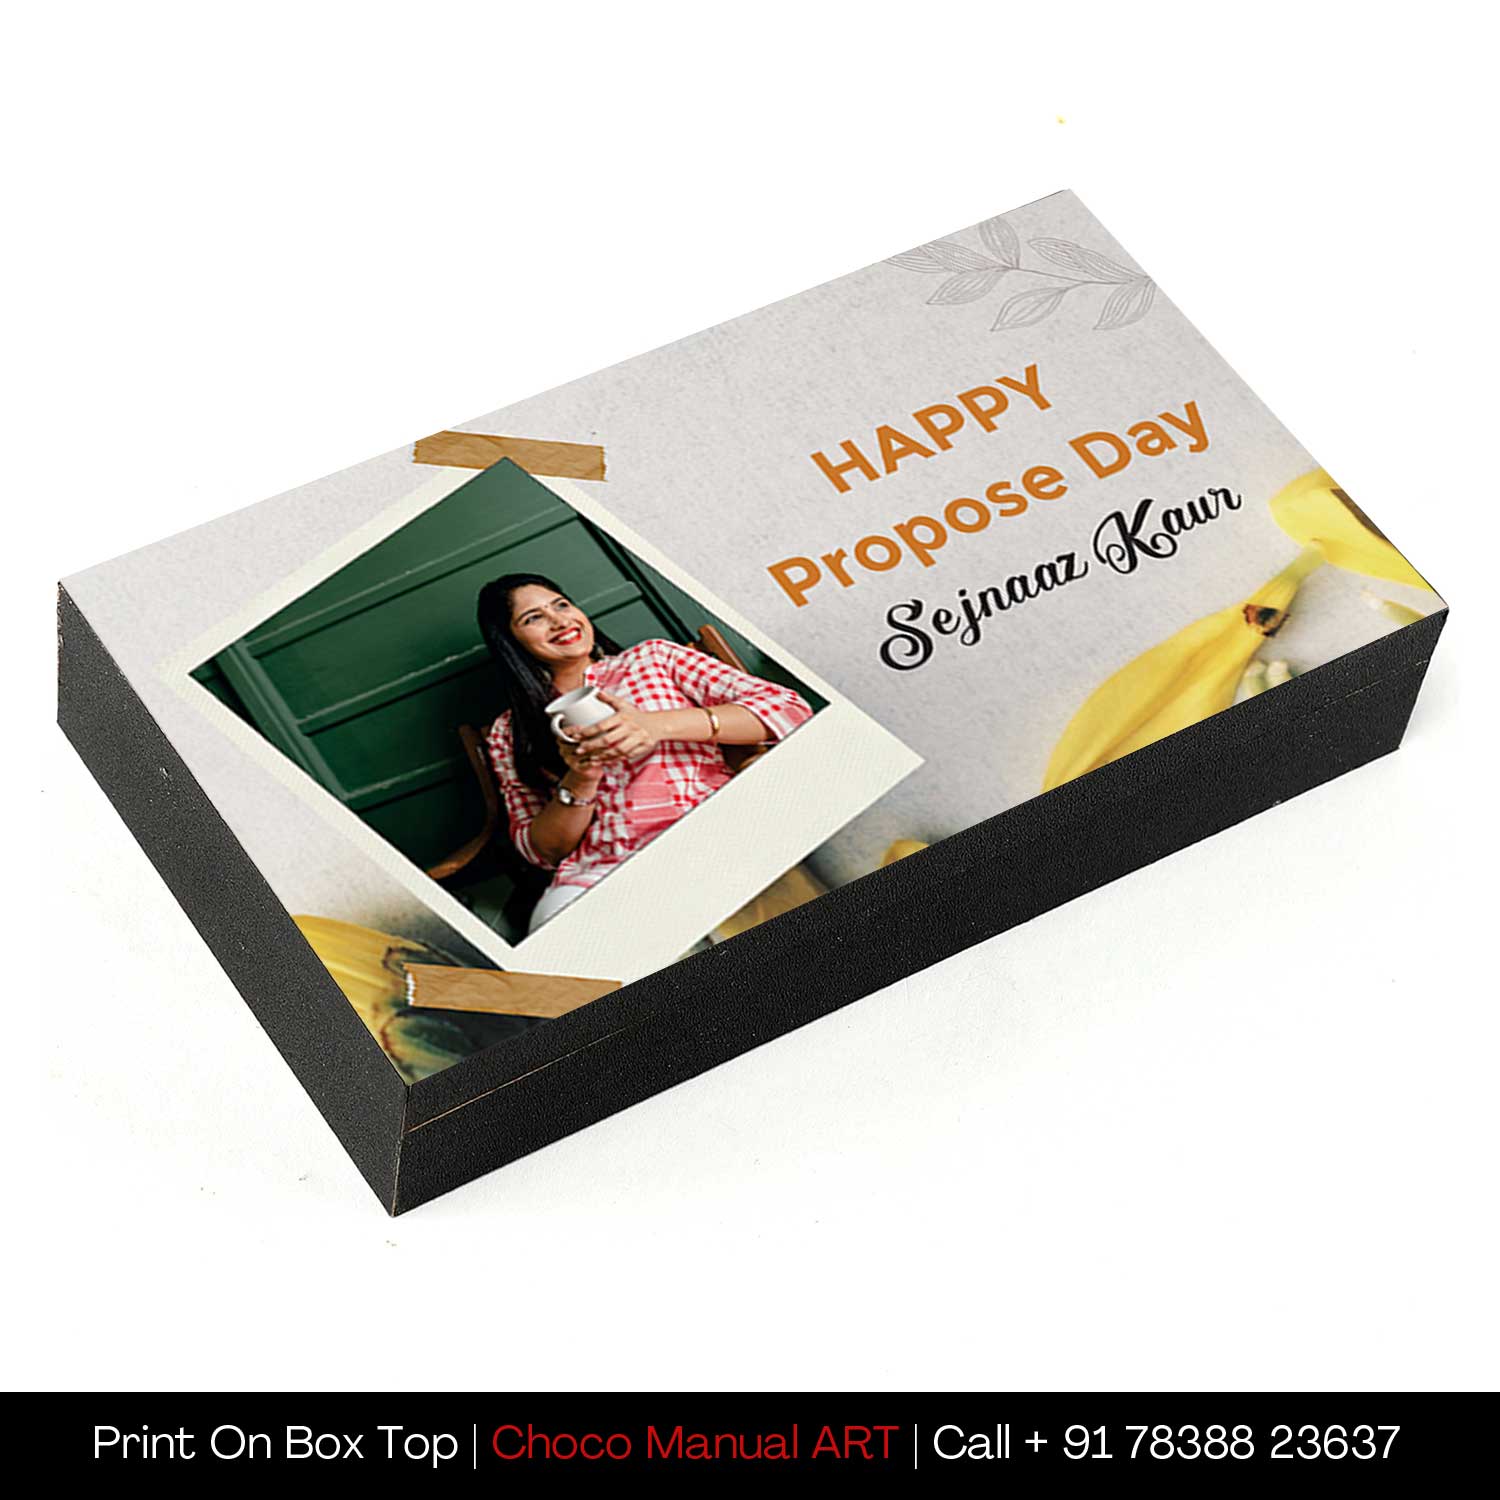 Best Propose Day image/name printed gift for friend